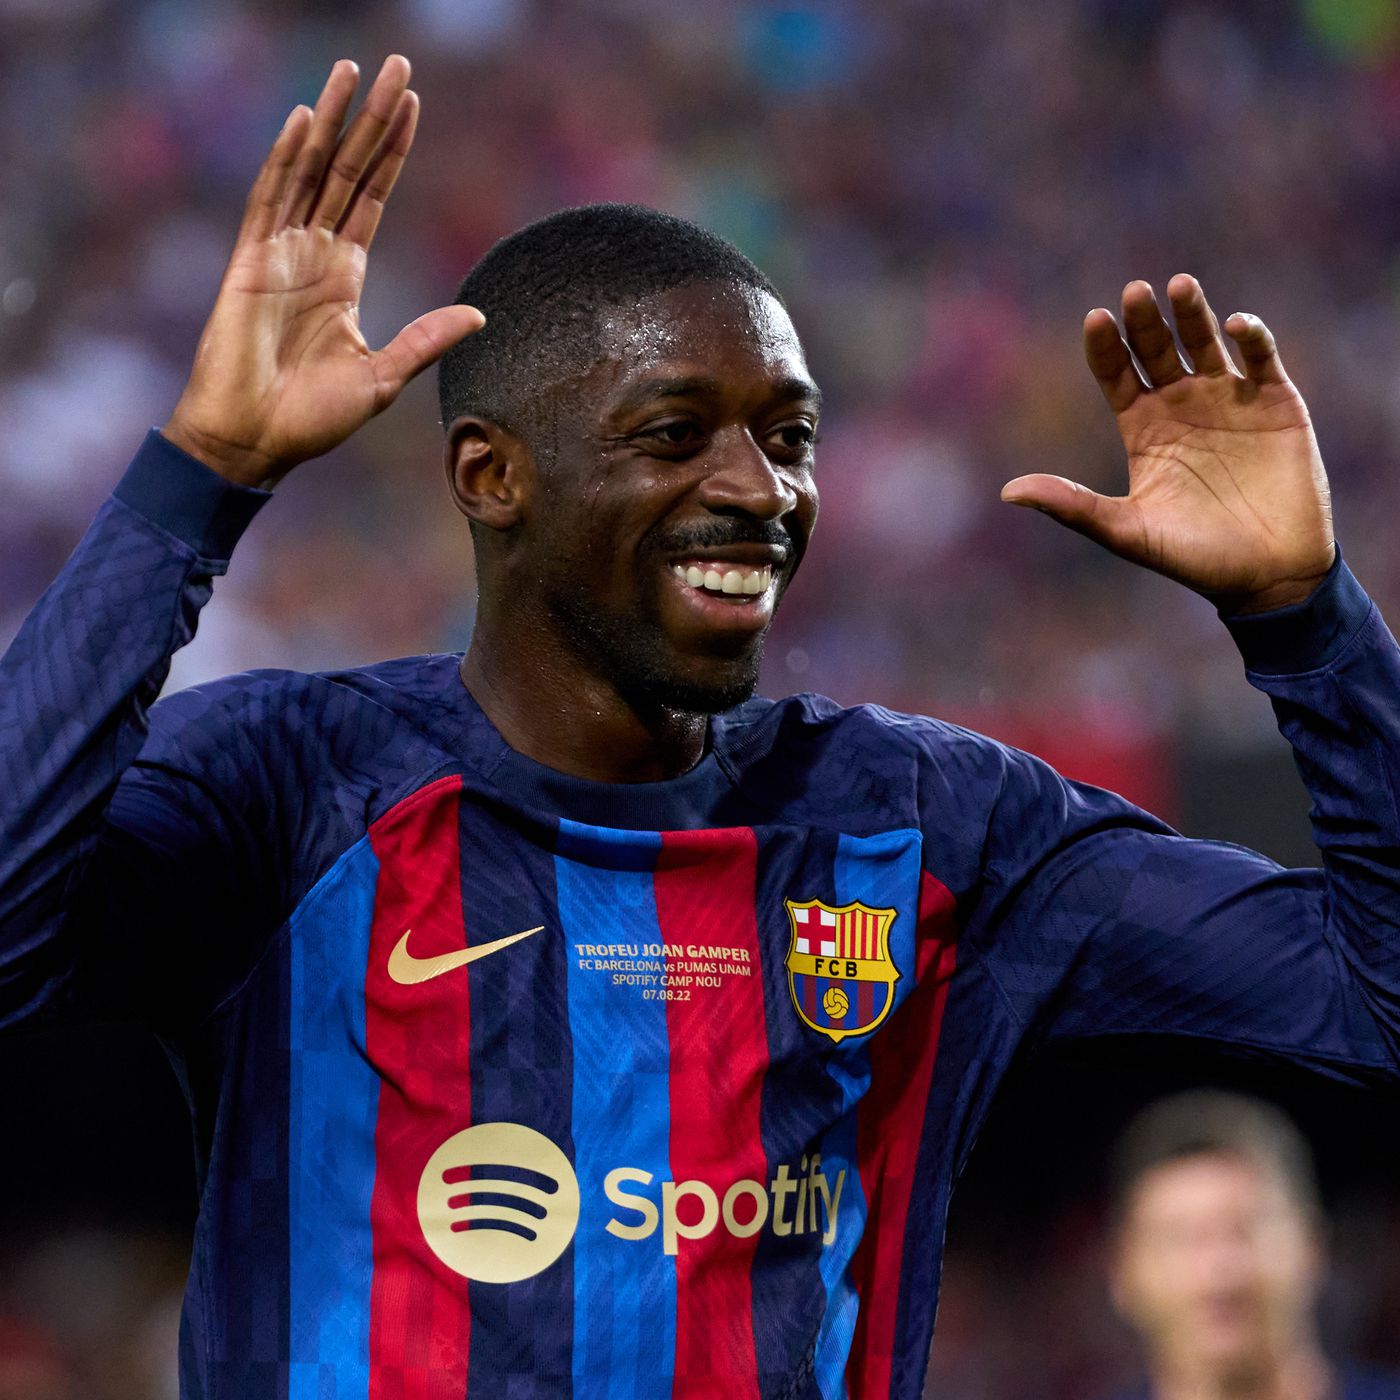 Thierry Henry amazed by Ousmane Dembele turnaround at Barcelona - Barca Blaugranes